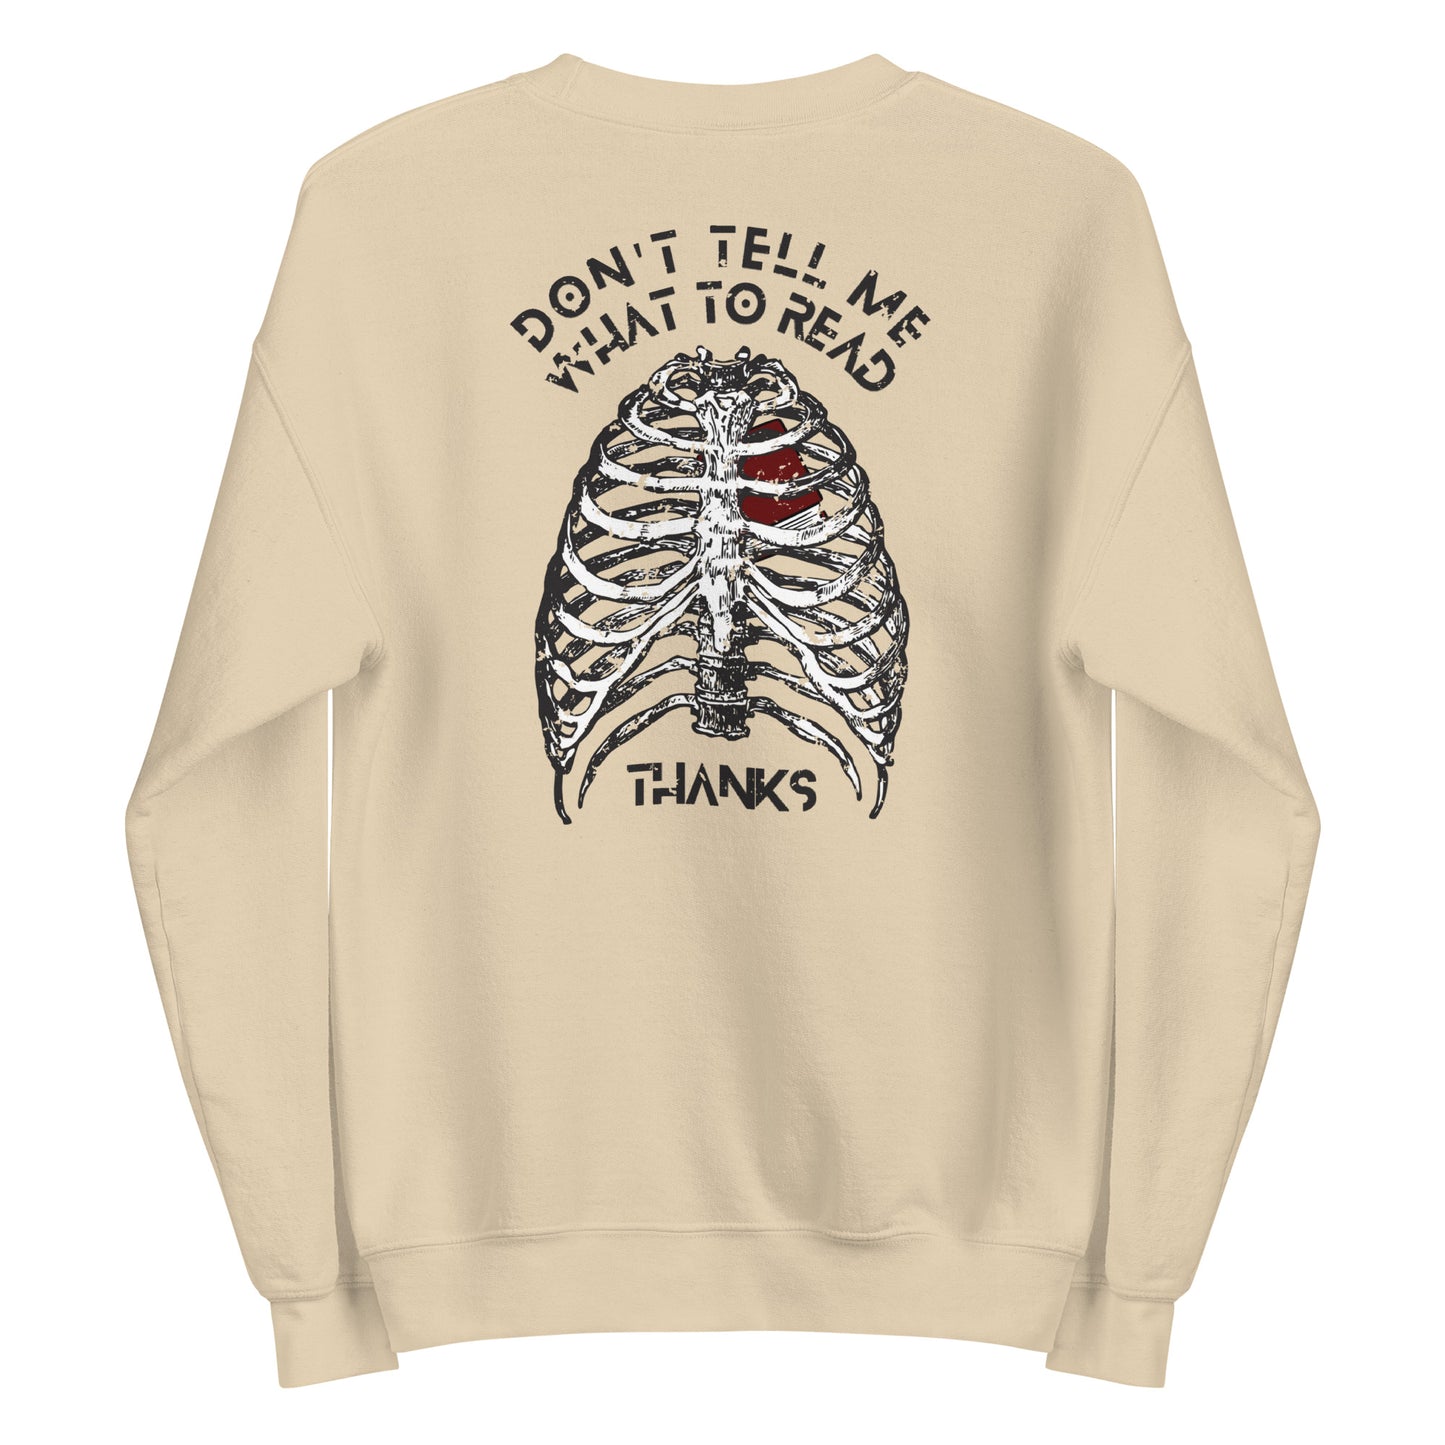 don't tell me what to read sweatshirt